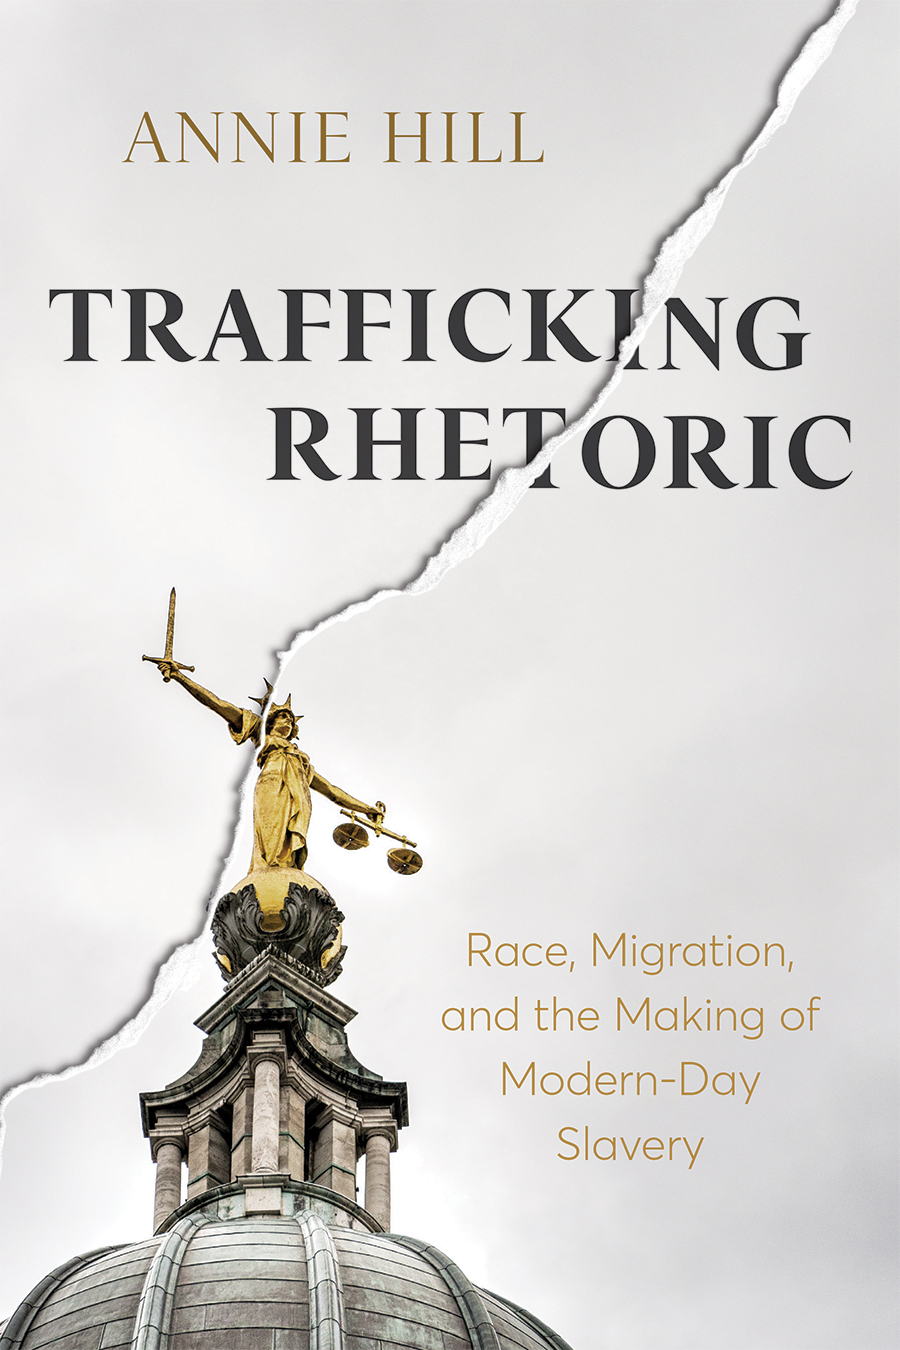 Front cover of Trafficking Rhetoric: Race, Migration, and the Making of Modern-Day Slavery by Annie Hill, featuring a close-up of Lady Justice atop the Old Bailey courthouse in London, set against a gray sky. A crack runs across the image and through Lady Justice.